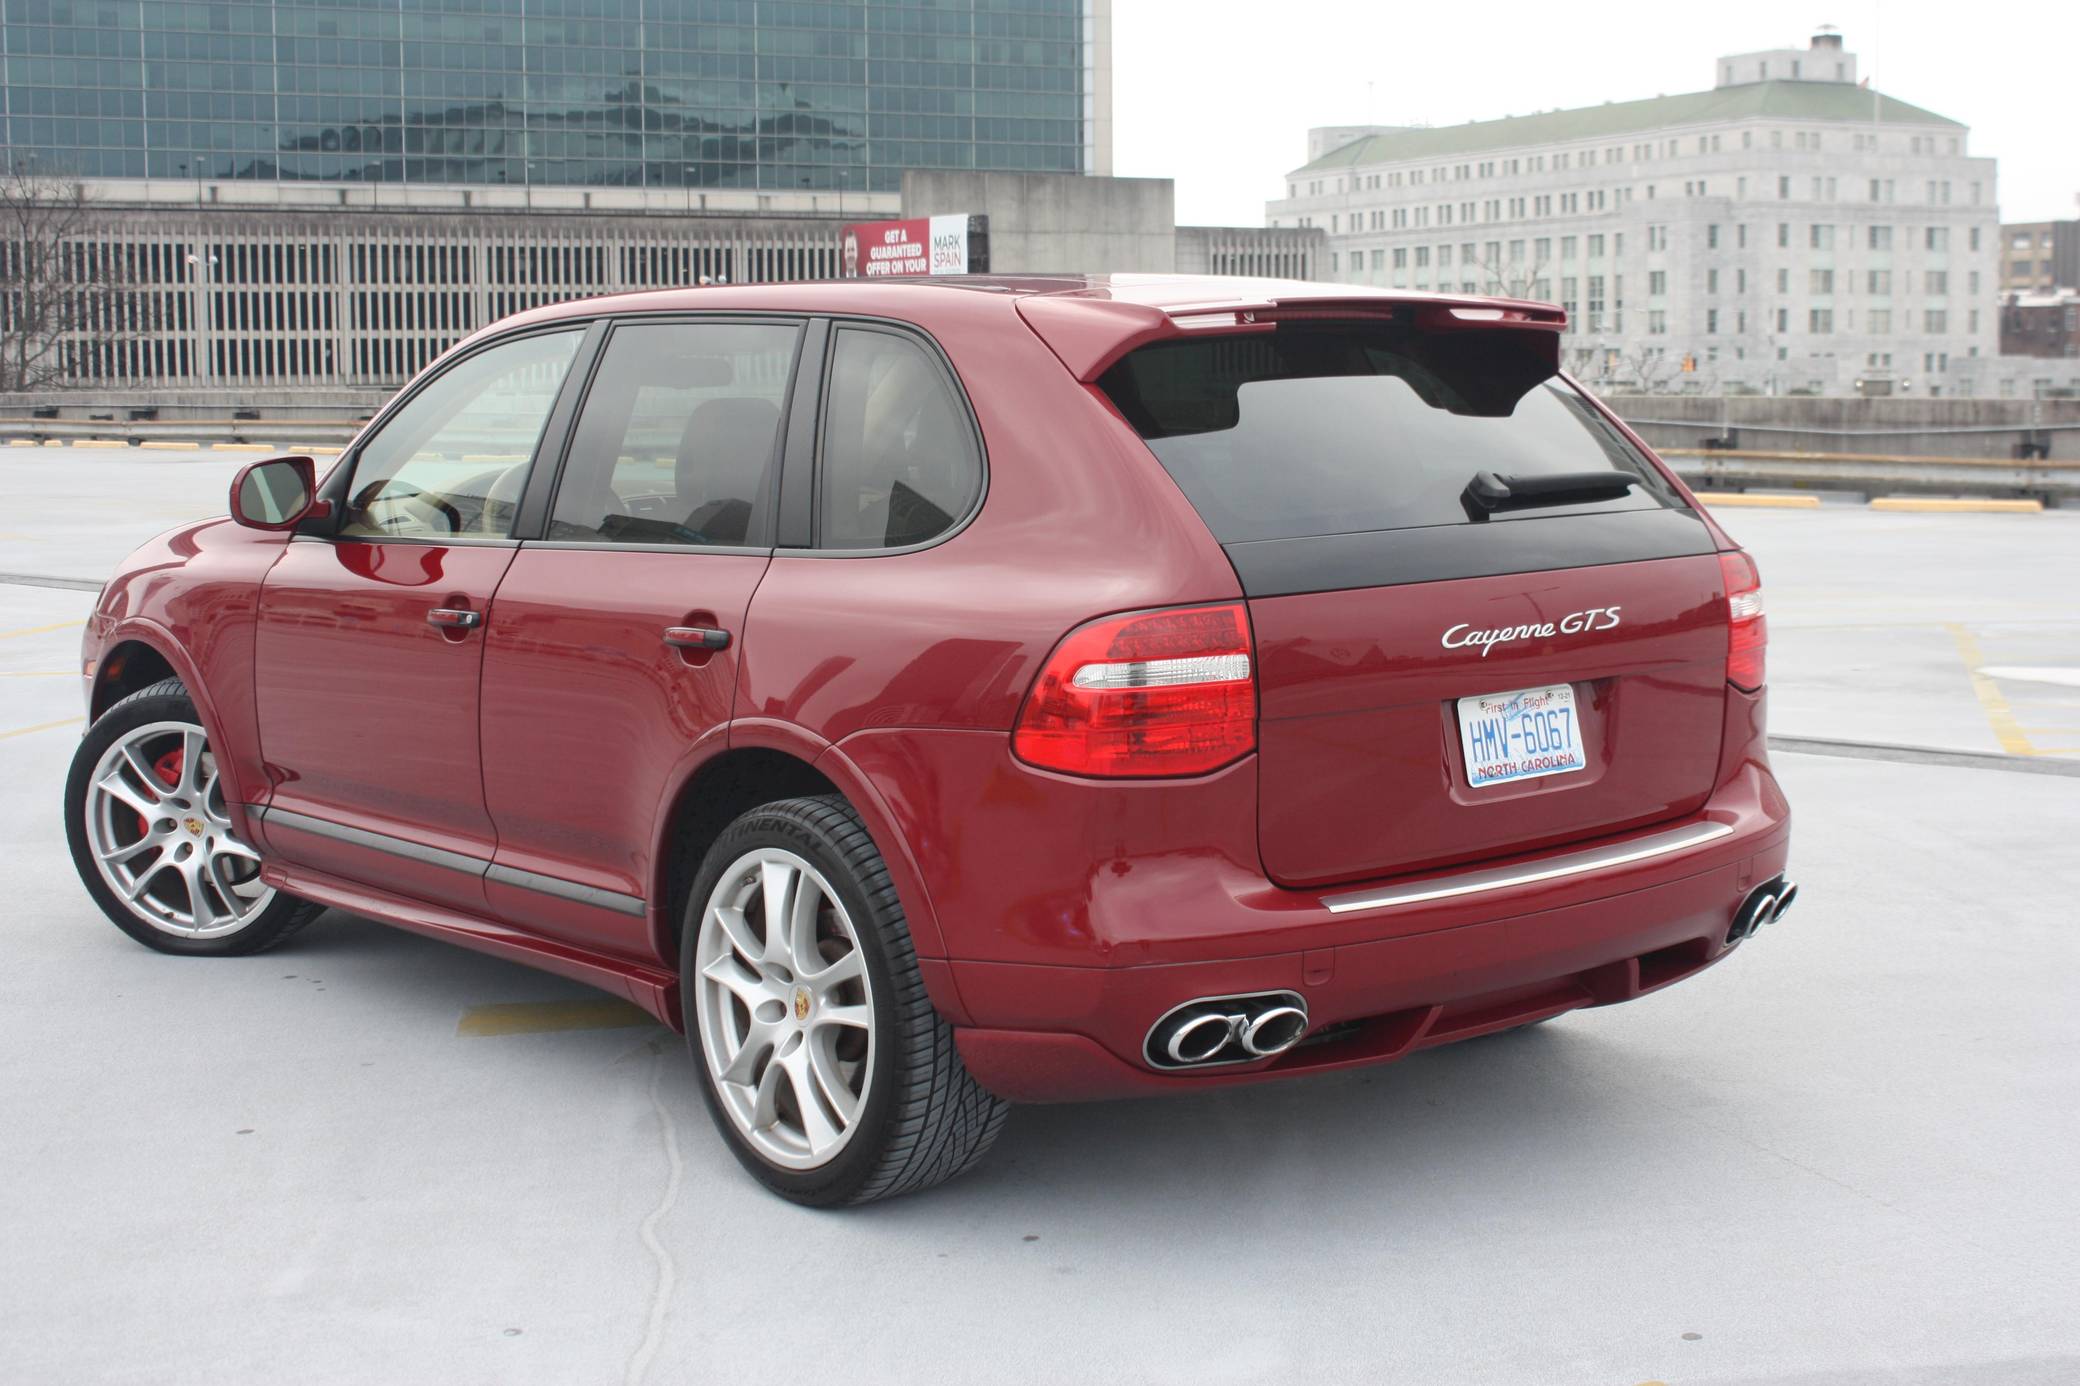 09 Porsche Cayenne Gts With Six Speed Manual Is A Rare Species Carscoops